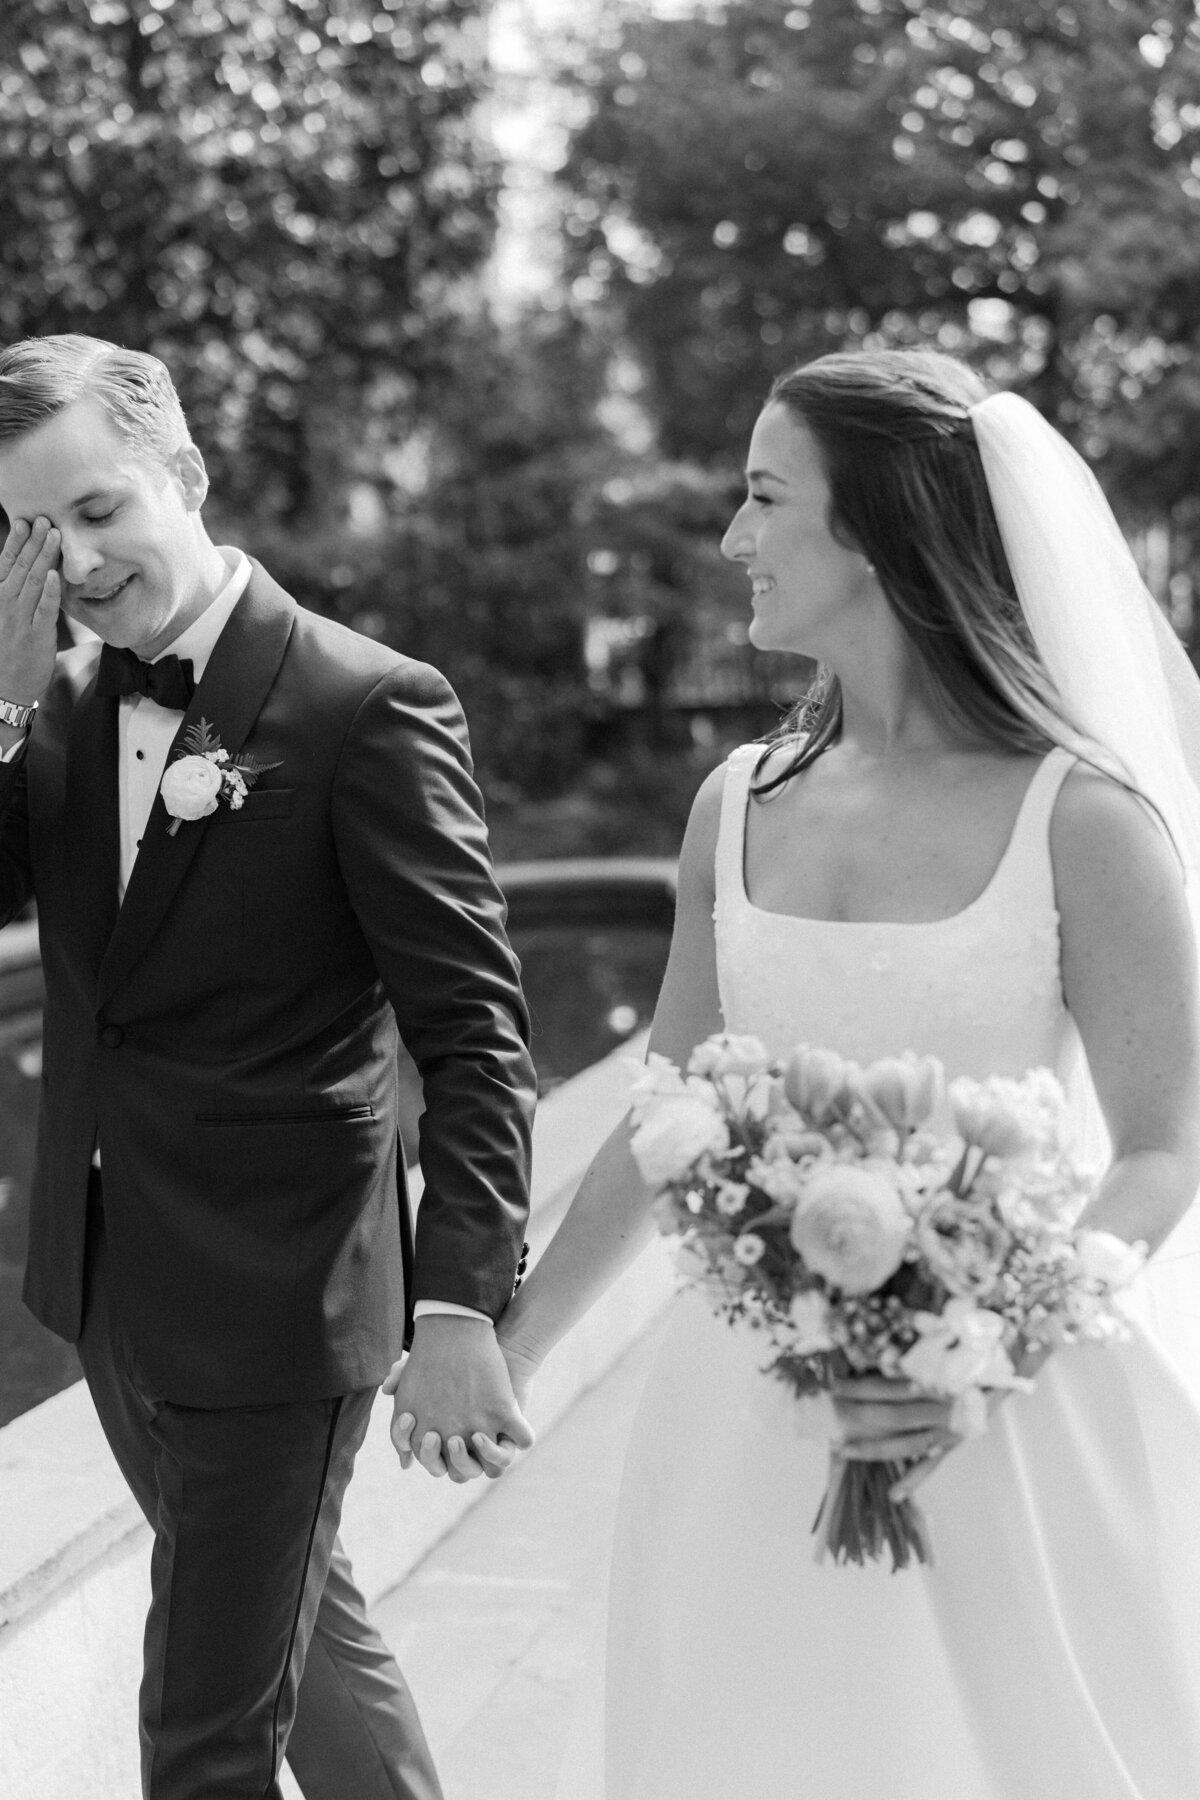 Groom wipes away tears while walking with bride to outdoor spring ceremony at William Aiken House. Intimate, emotional moments captured by wedding photographer. Black and white wedding photographer. Kailee DiMeglio Photography.